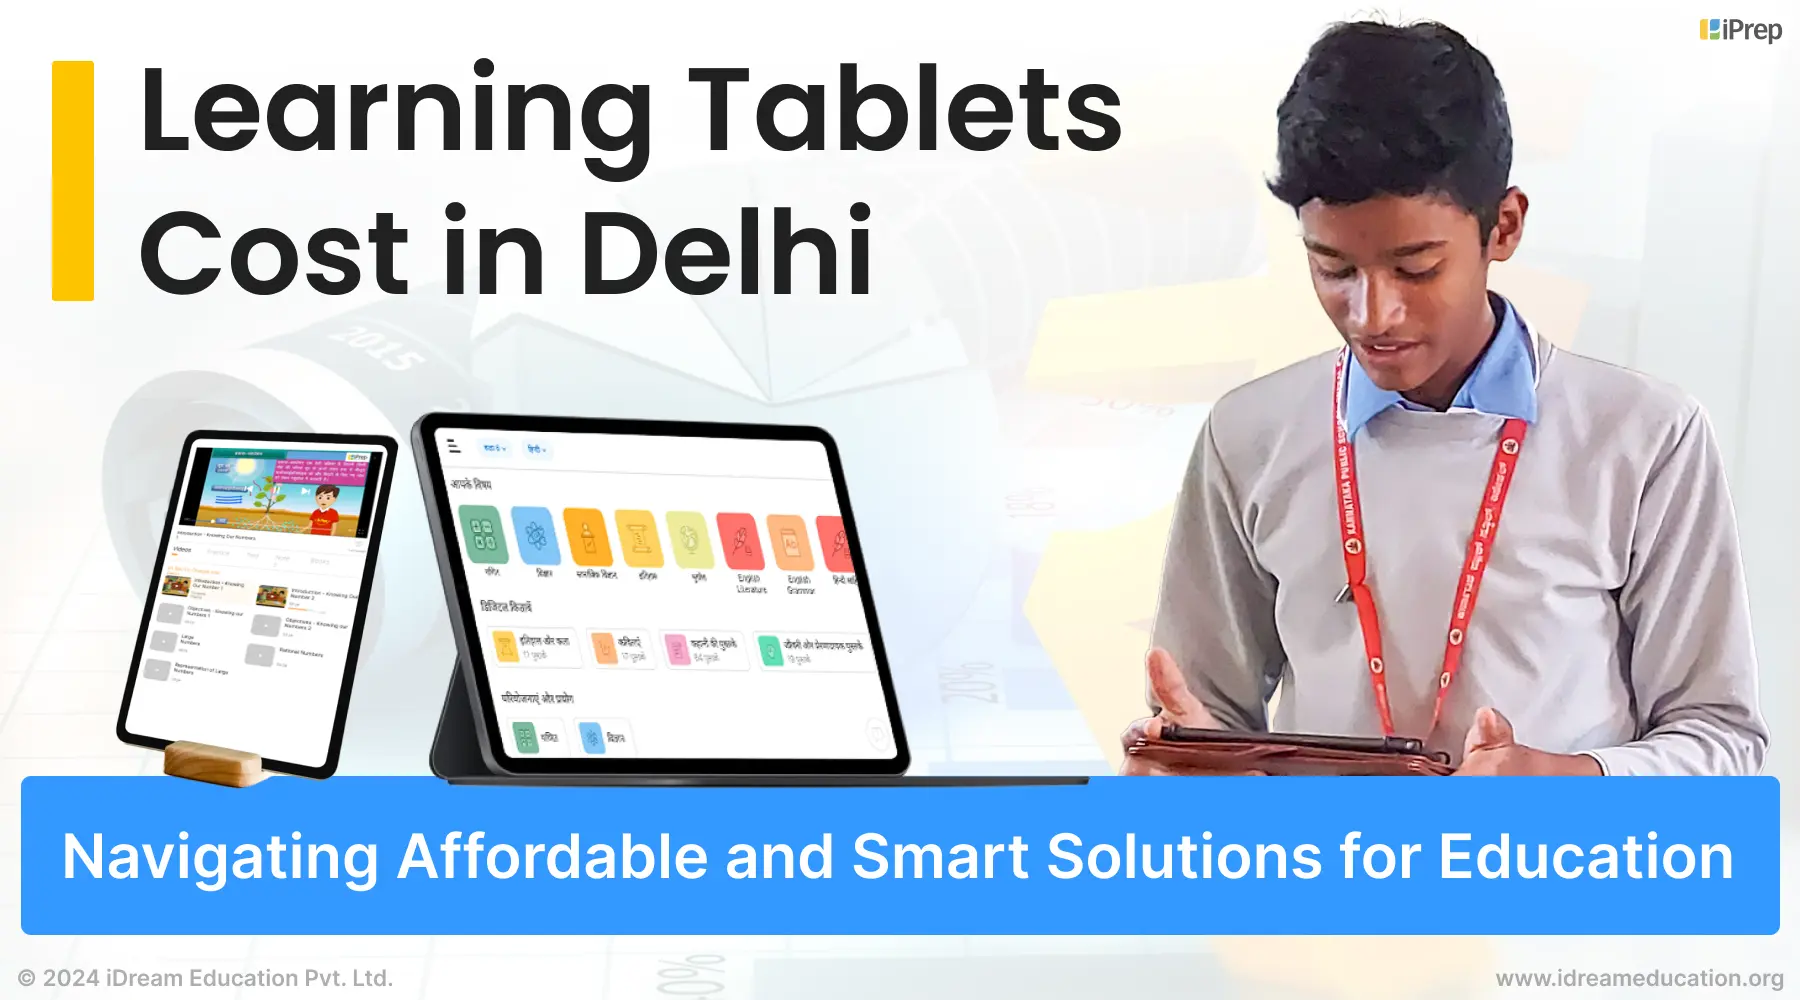 A visual representation of navigating learning tablet cost in Delhi to find the most ideal solution for your needs